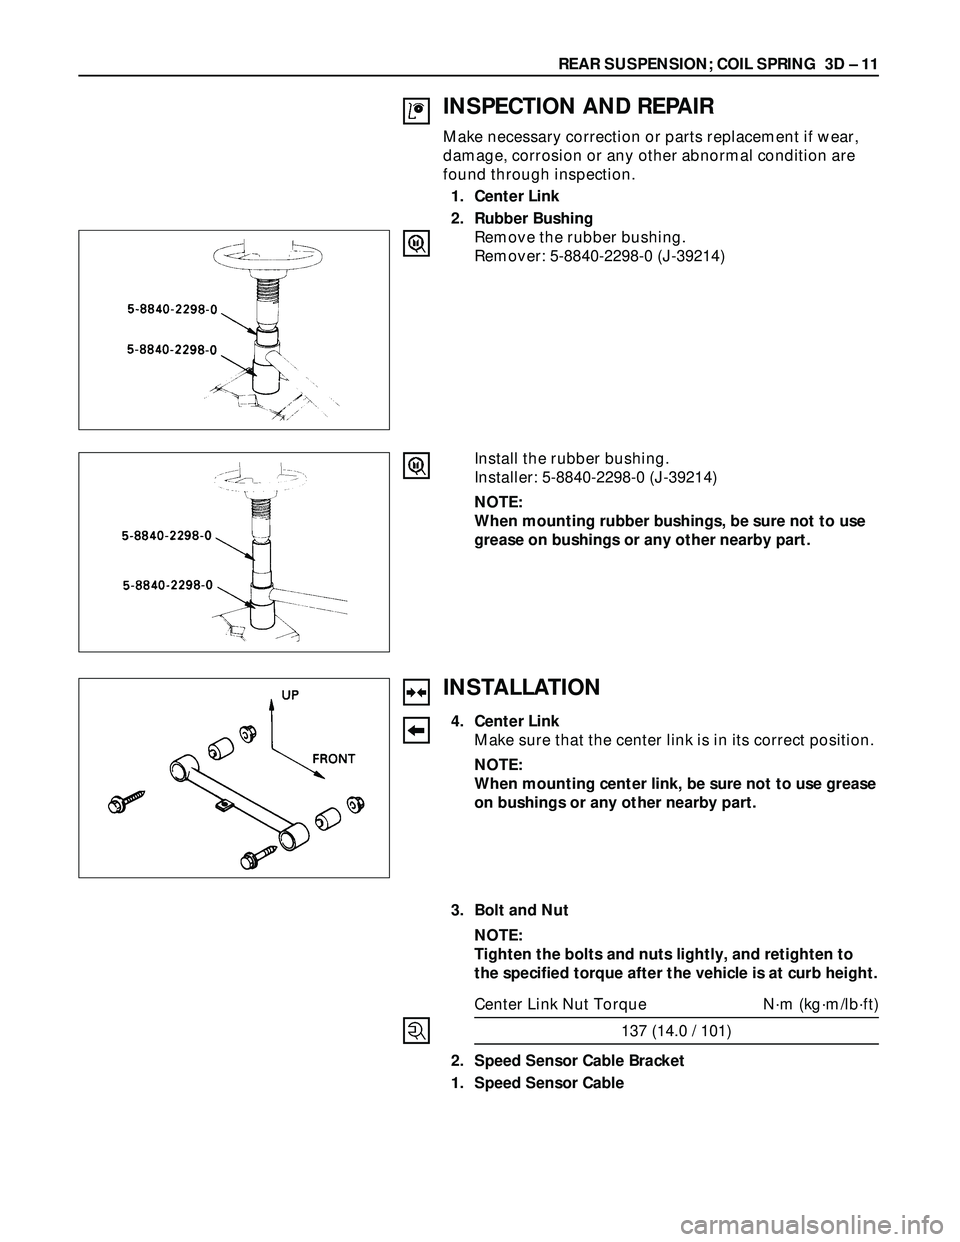 ISUZU TROOPER 1998  Service User Guide REAR SUSPENSION; COIL SPRING  3D – 11
INSPECTION AND REPAIR
Make necessary correction or parts replacement if wear,
damage, corrosion or any other abnormal condition are
found through inspection.
1.